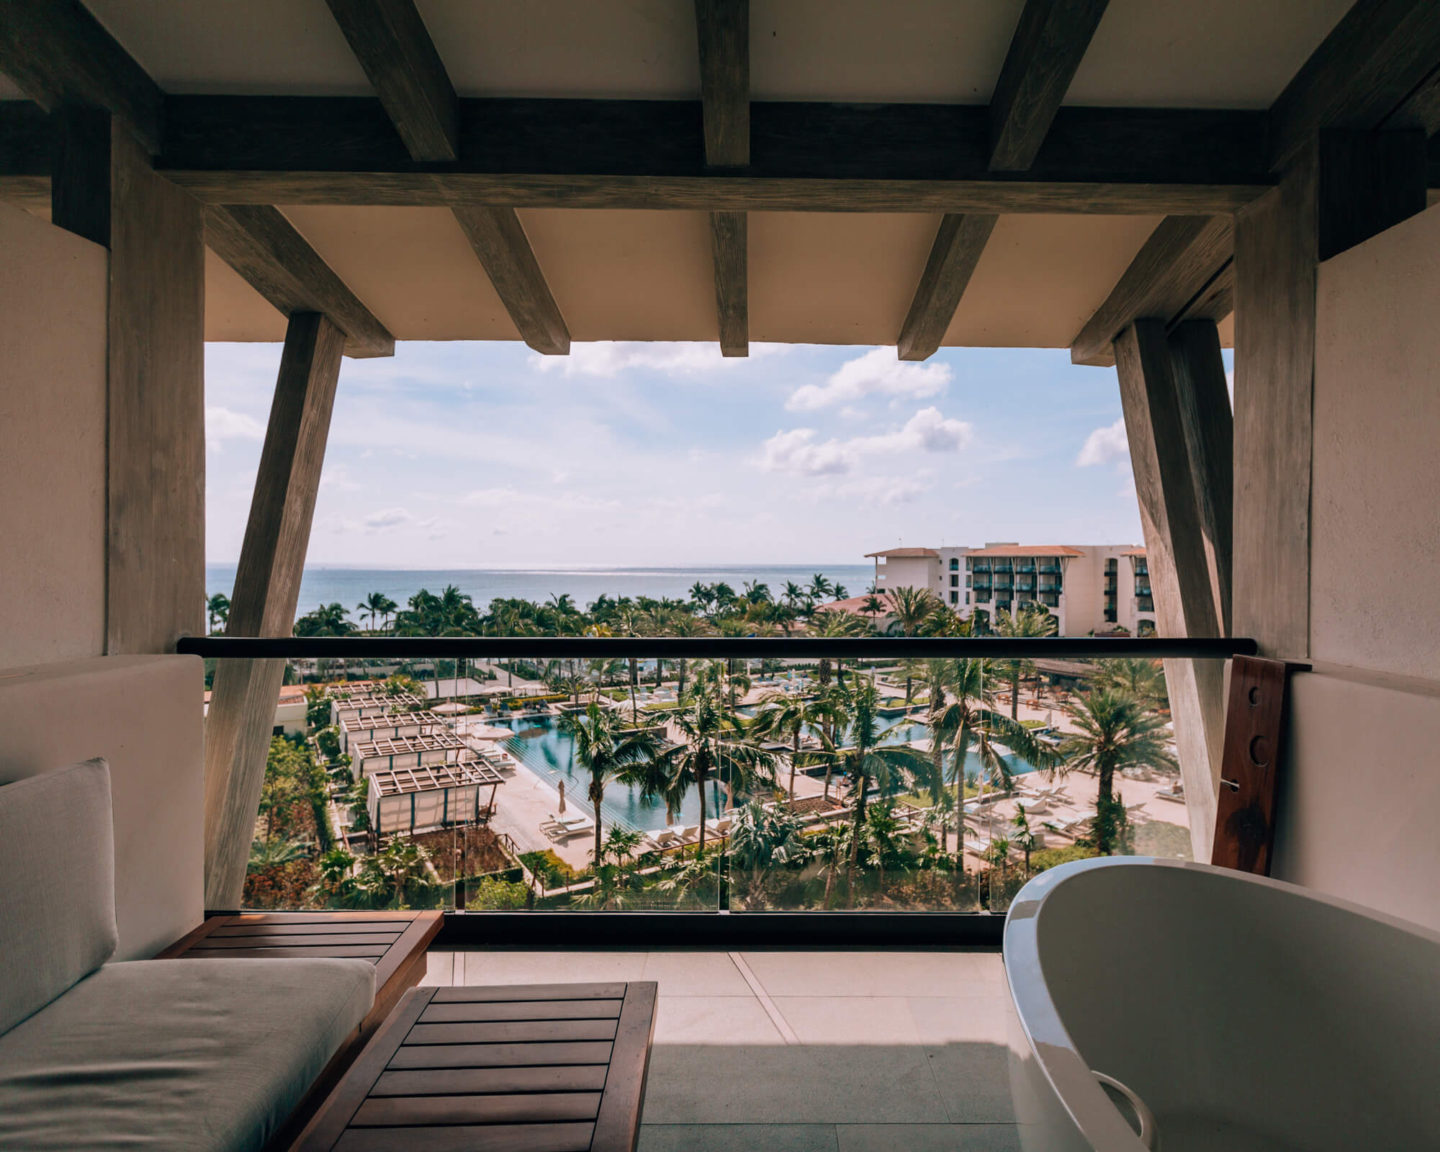 The view from the balcony at UNICO 2087 Riviera Maya